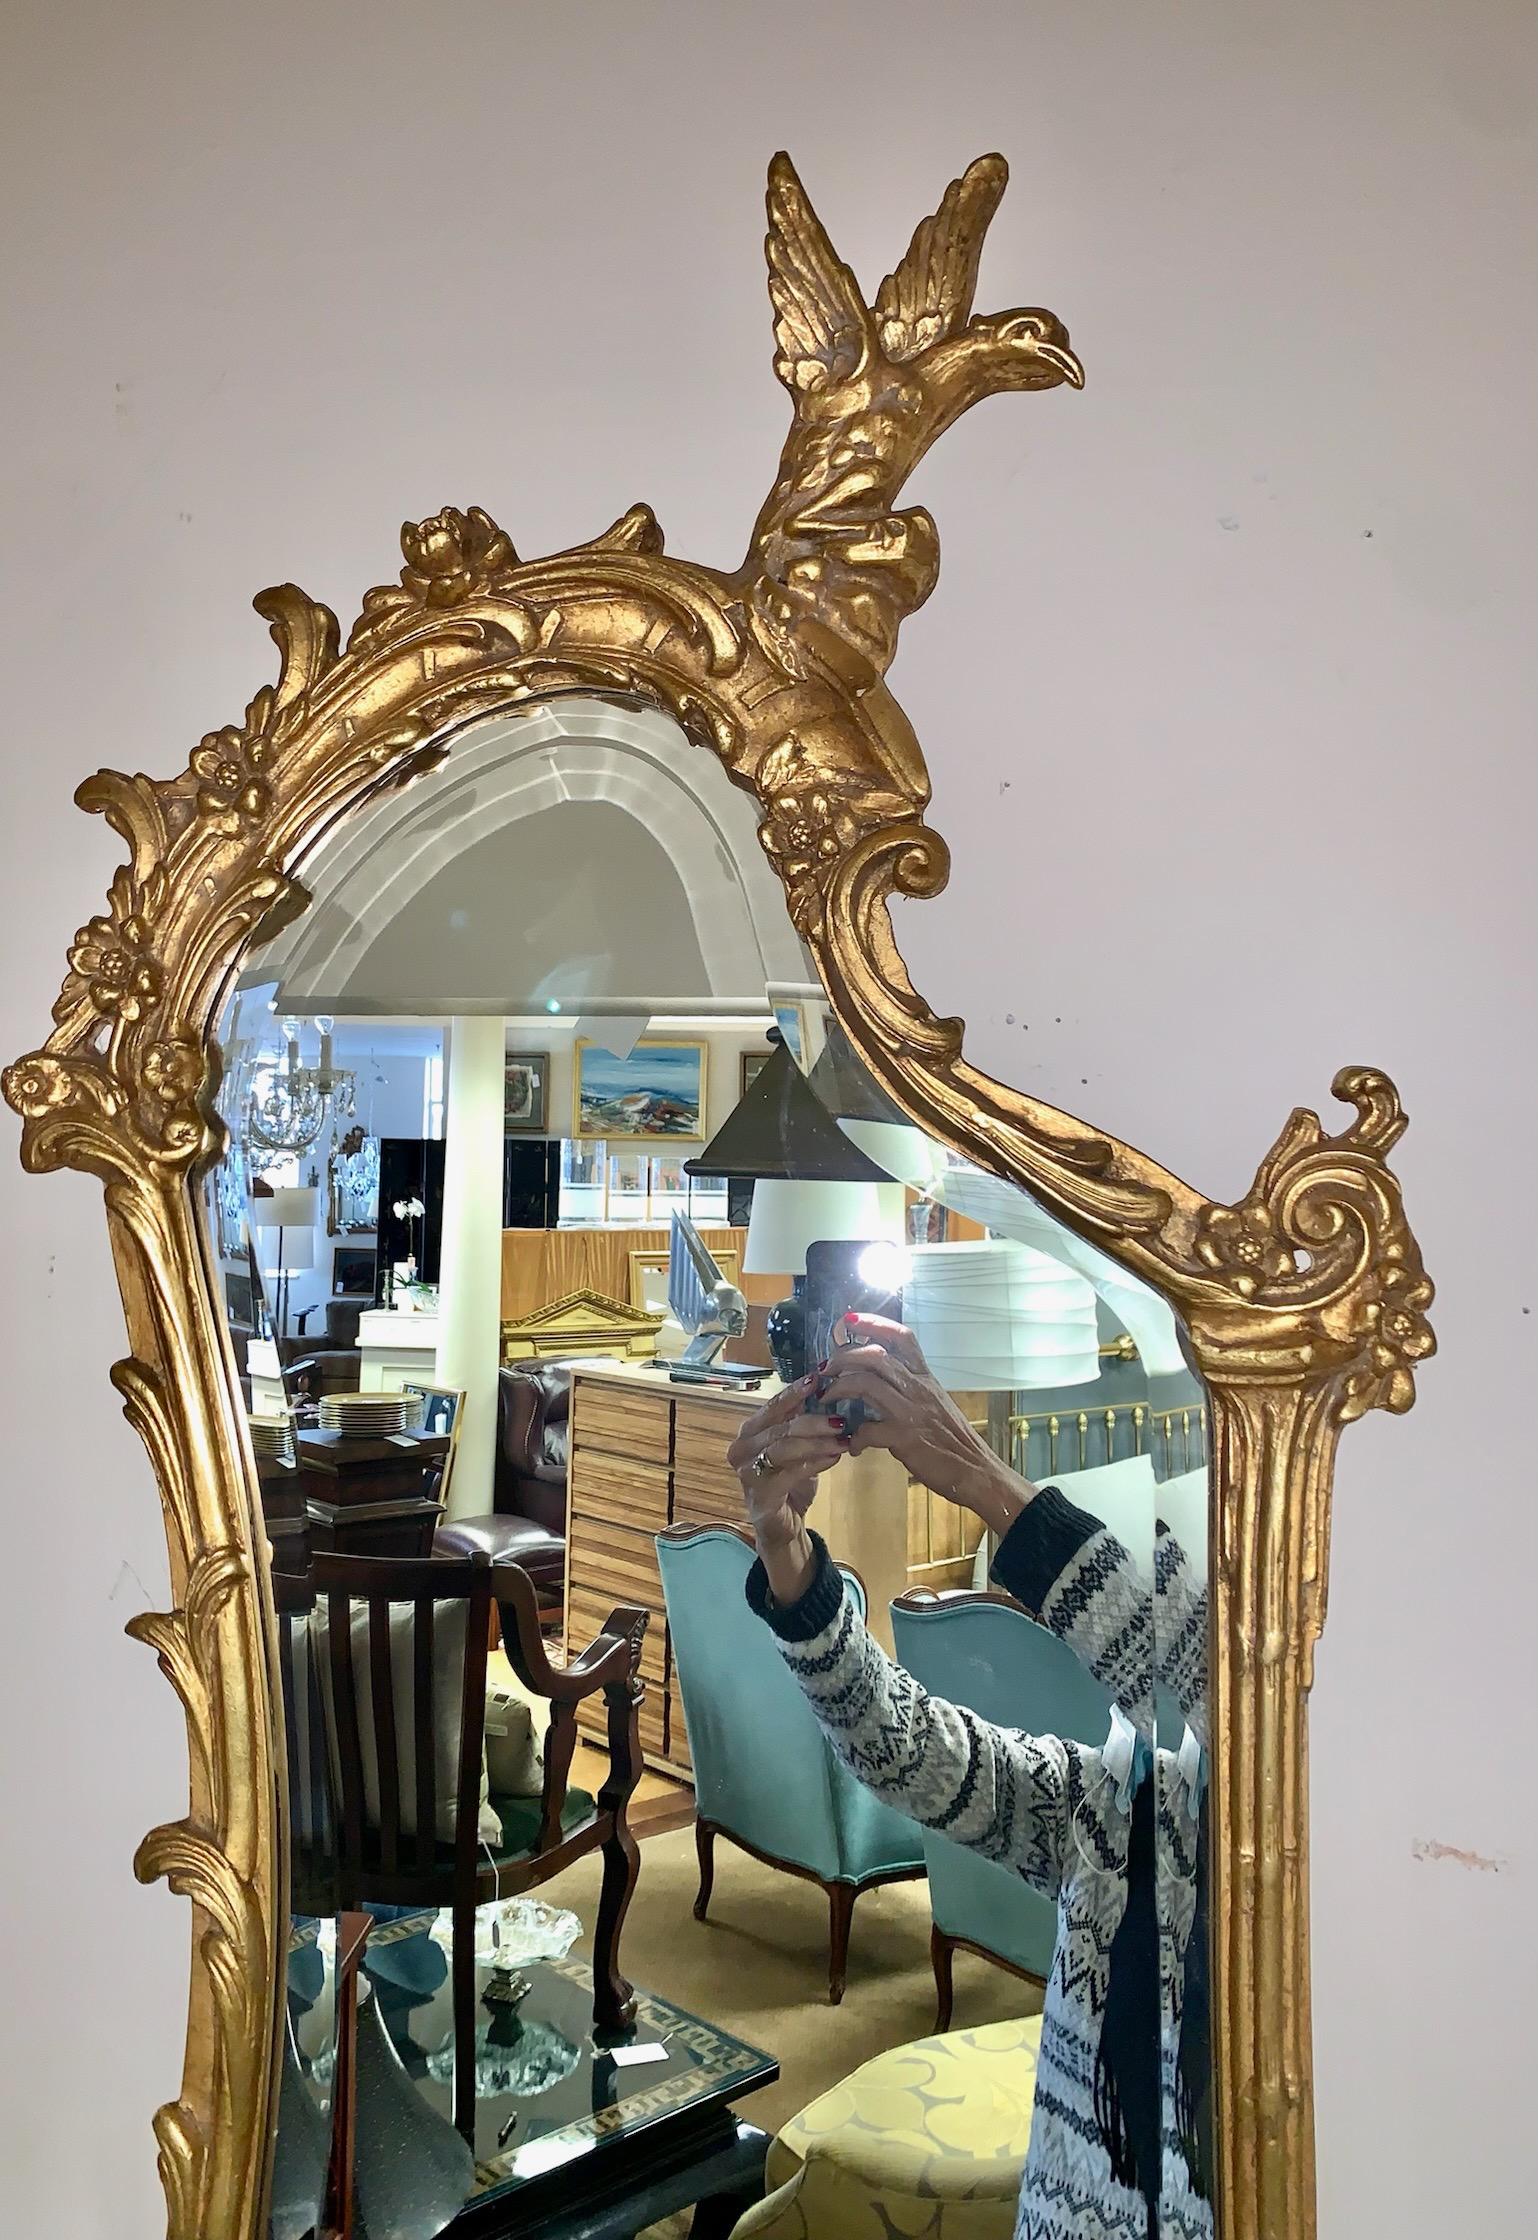 Magnificent pair of ornate giltwood shaped mirrors feature a surmounted carved phoenix bird with floral and foliage decoration enclosing a beveled mirror. Each has a projected two arm candle sconces. By Friedman Brothers.